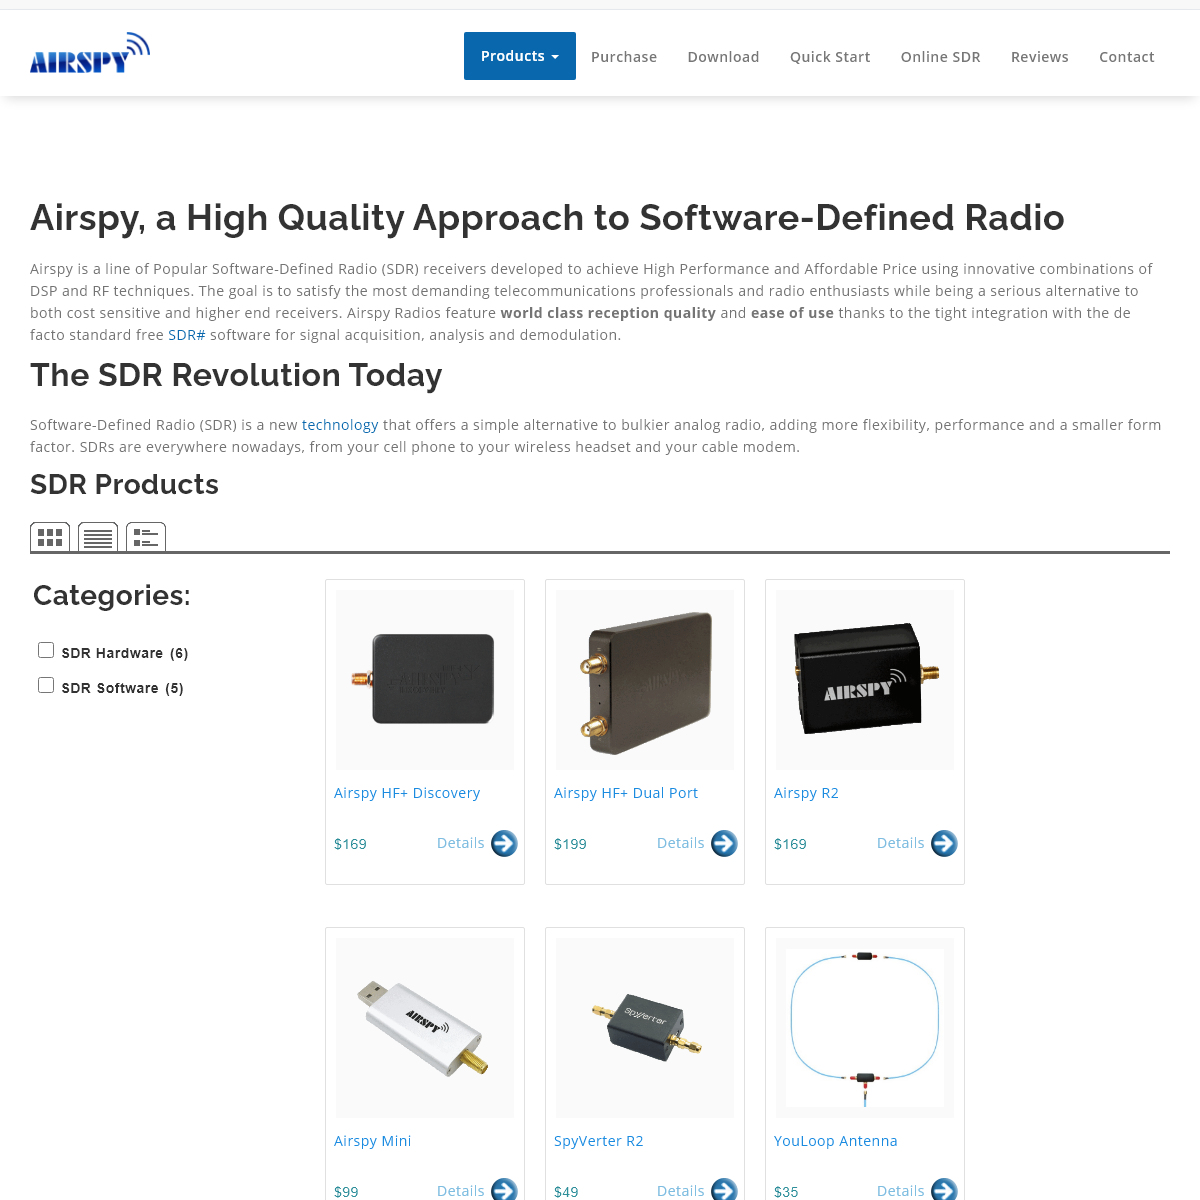 A complete backup of airspy.com